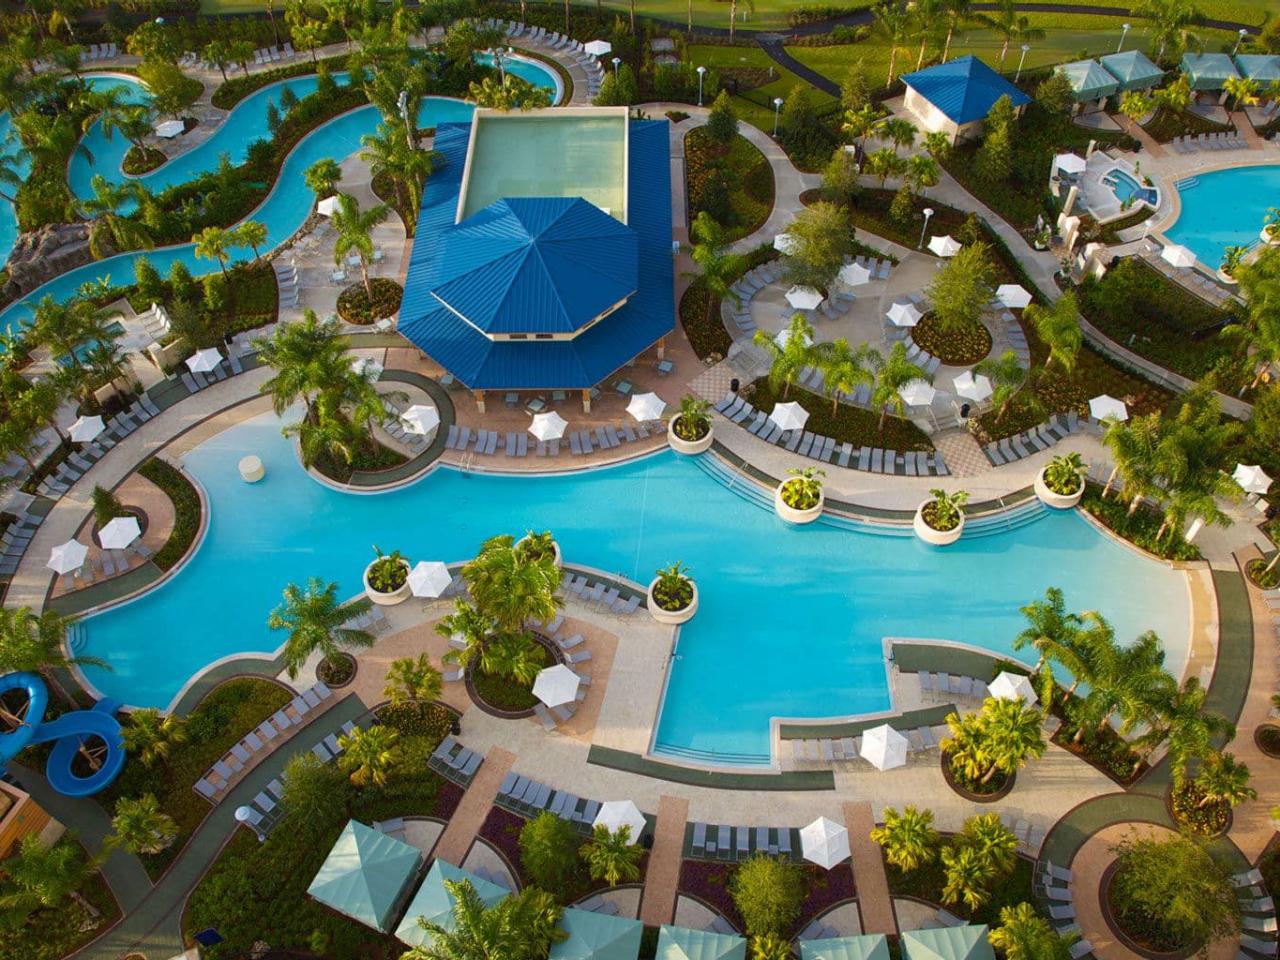 THE 10 CLOSEST Hotels to Theme Park Adventures of Orlando